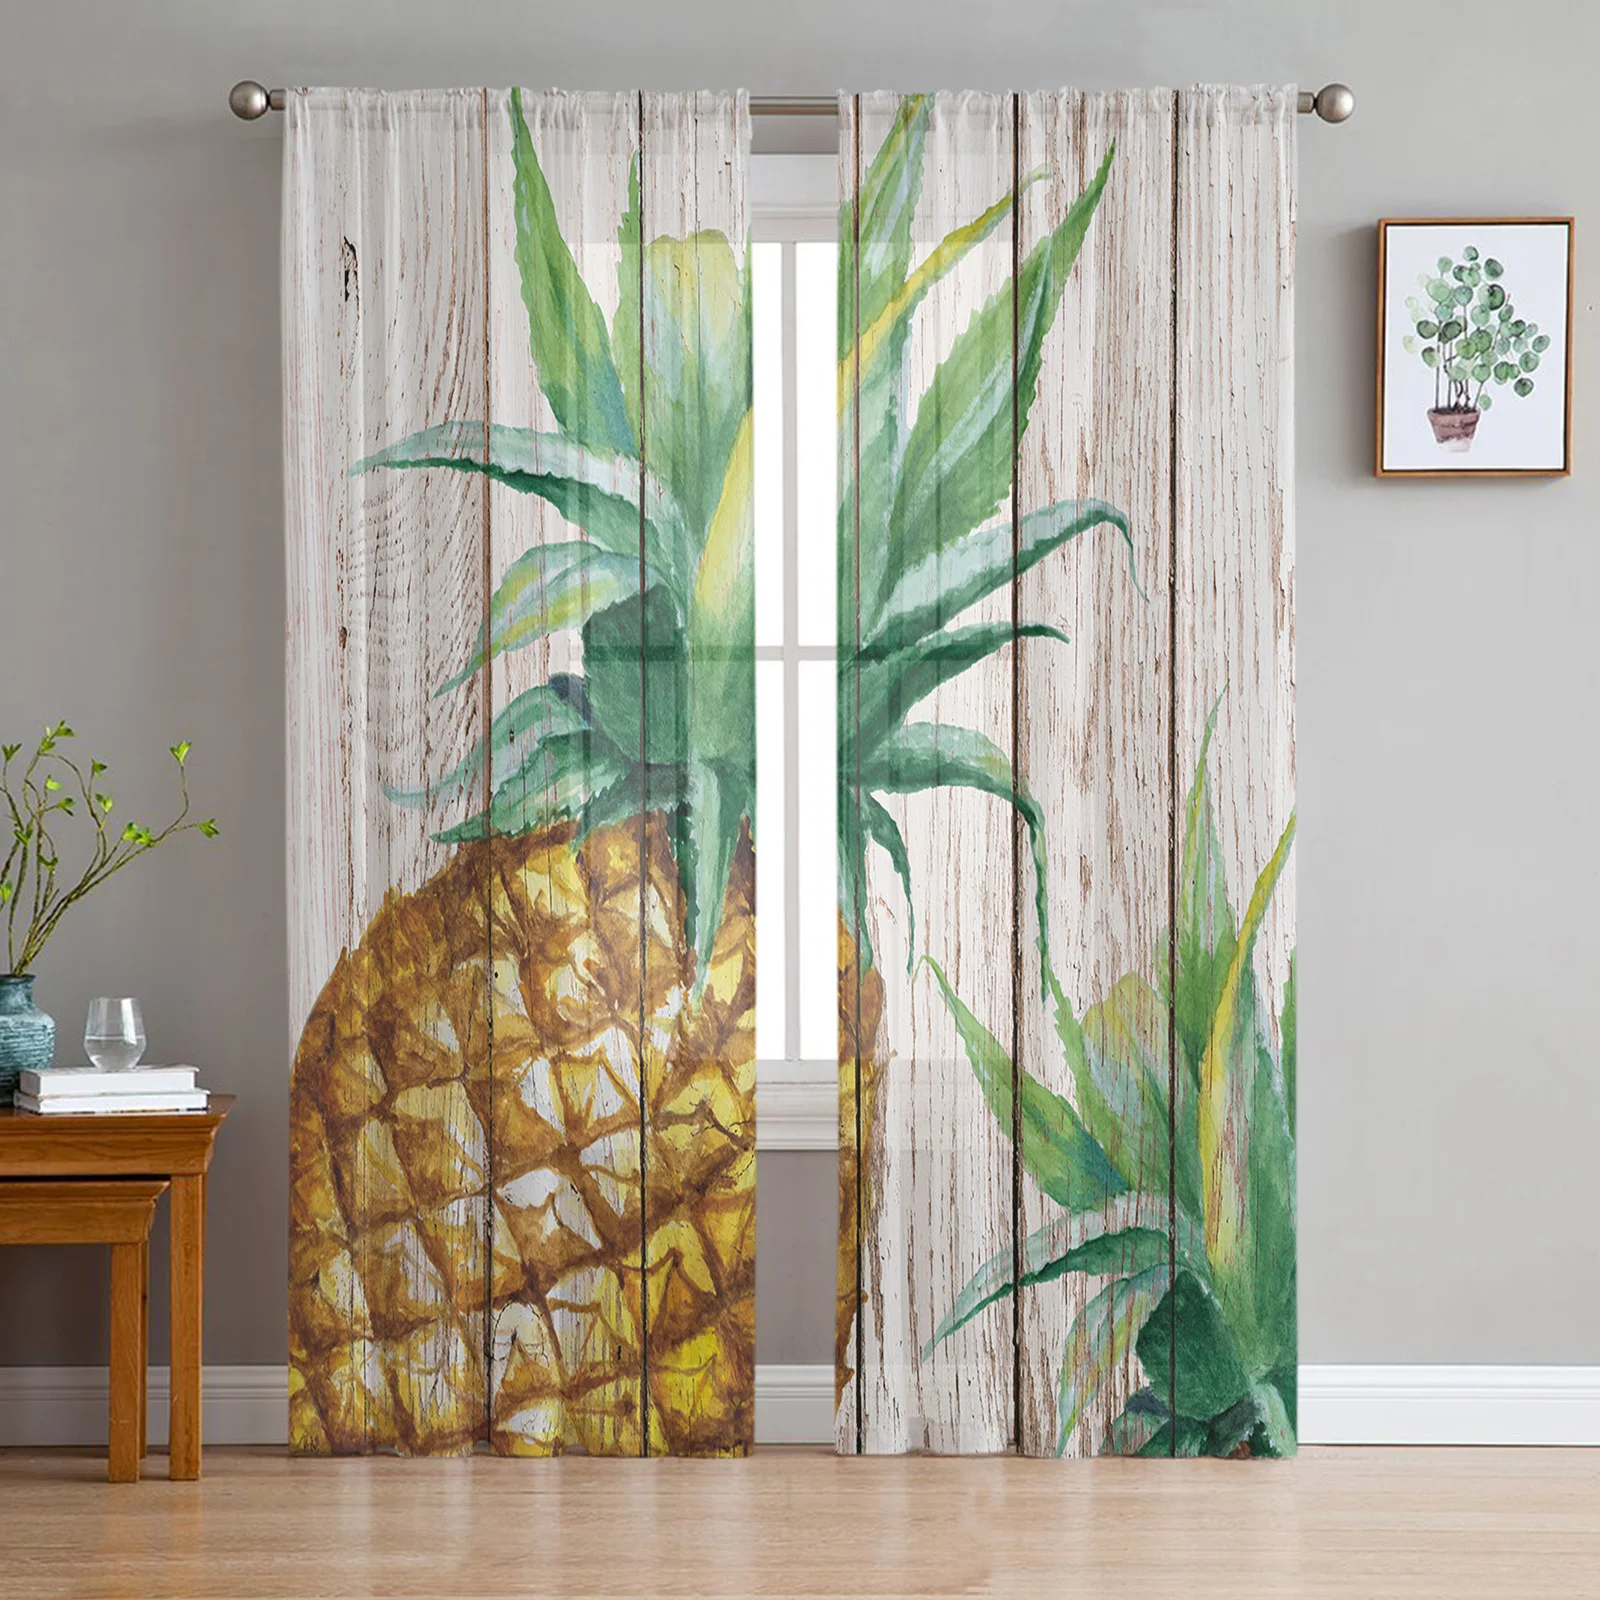 

Vintage Wood Grain Tropical Fruit Pineapple Tulle Curtains Living Room Kitchen Window Decoration Chiffon Voile Sheer Curtain